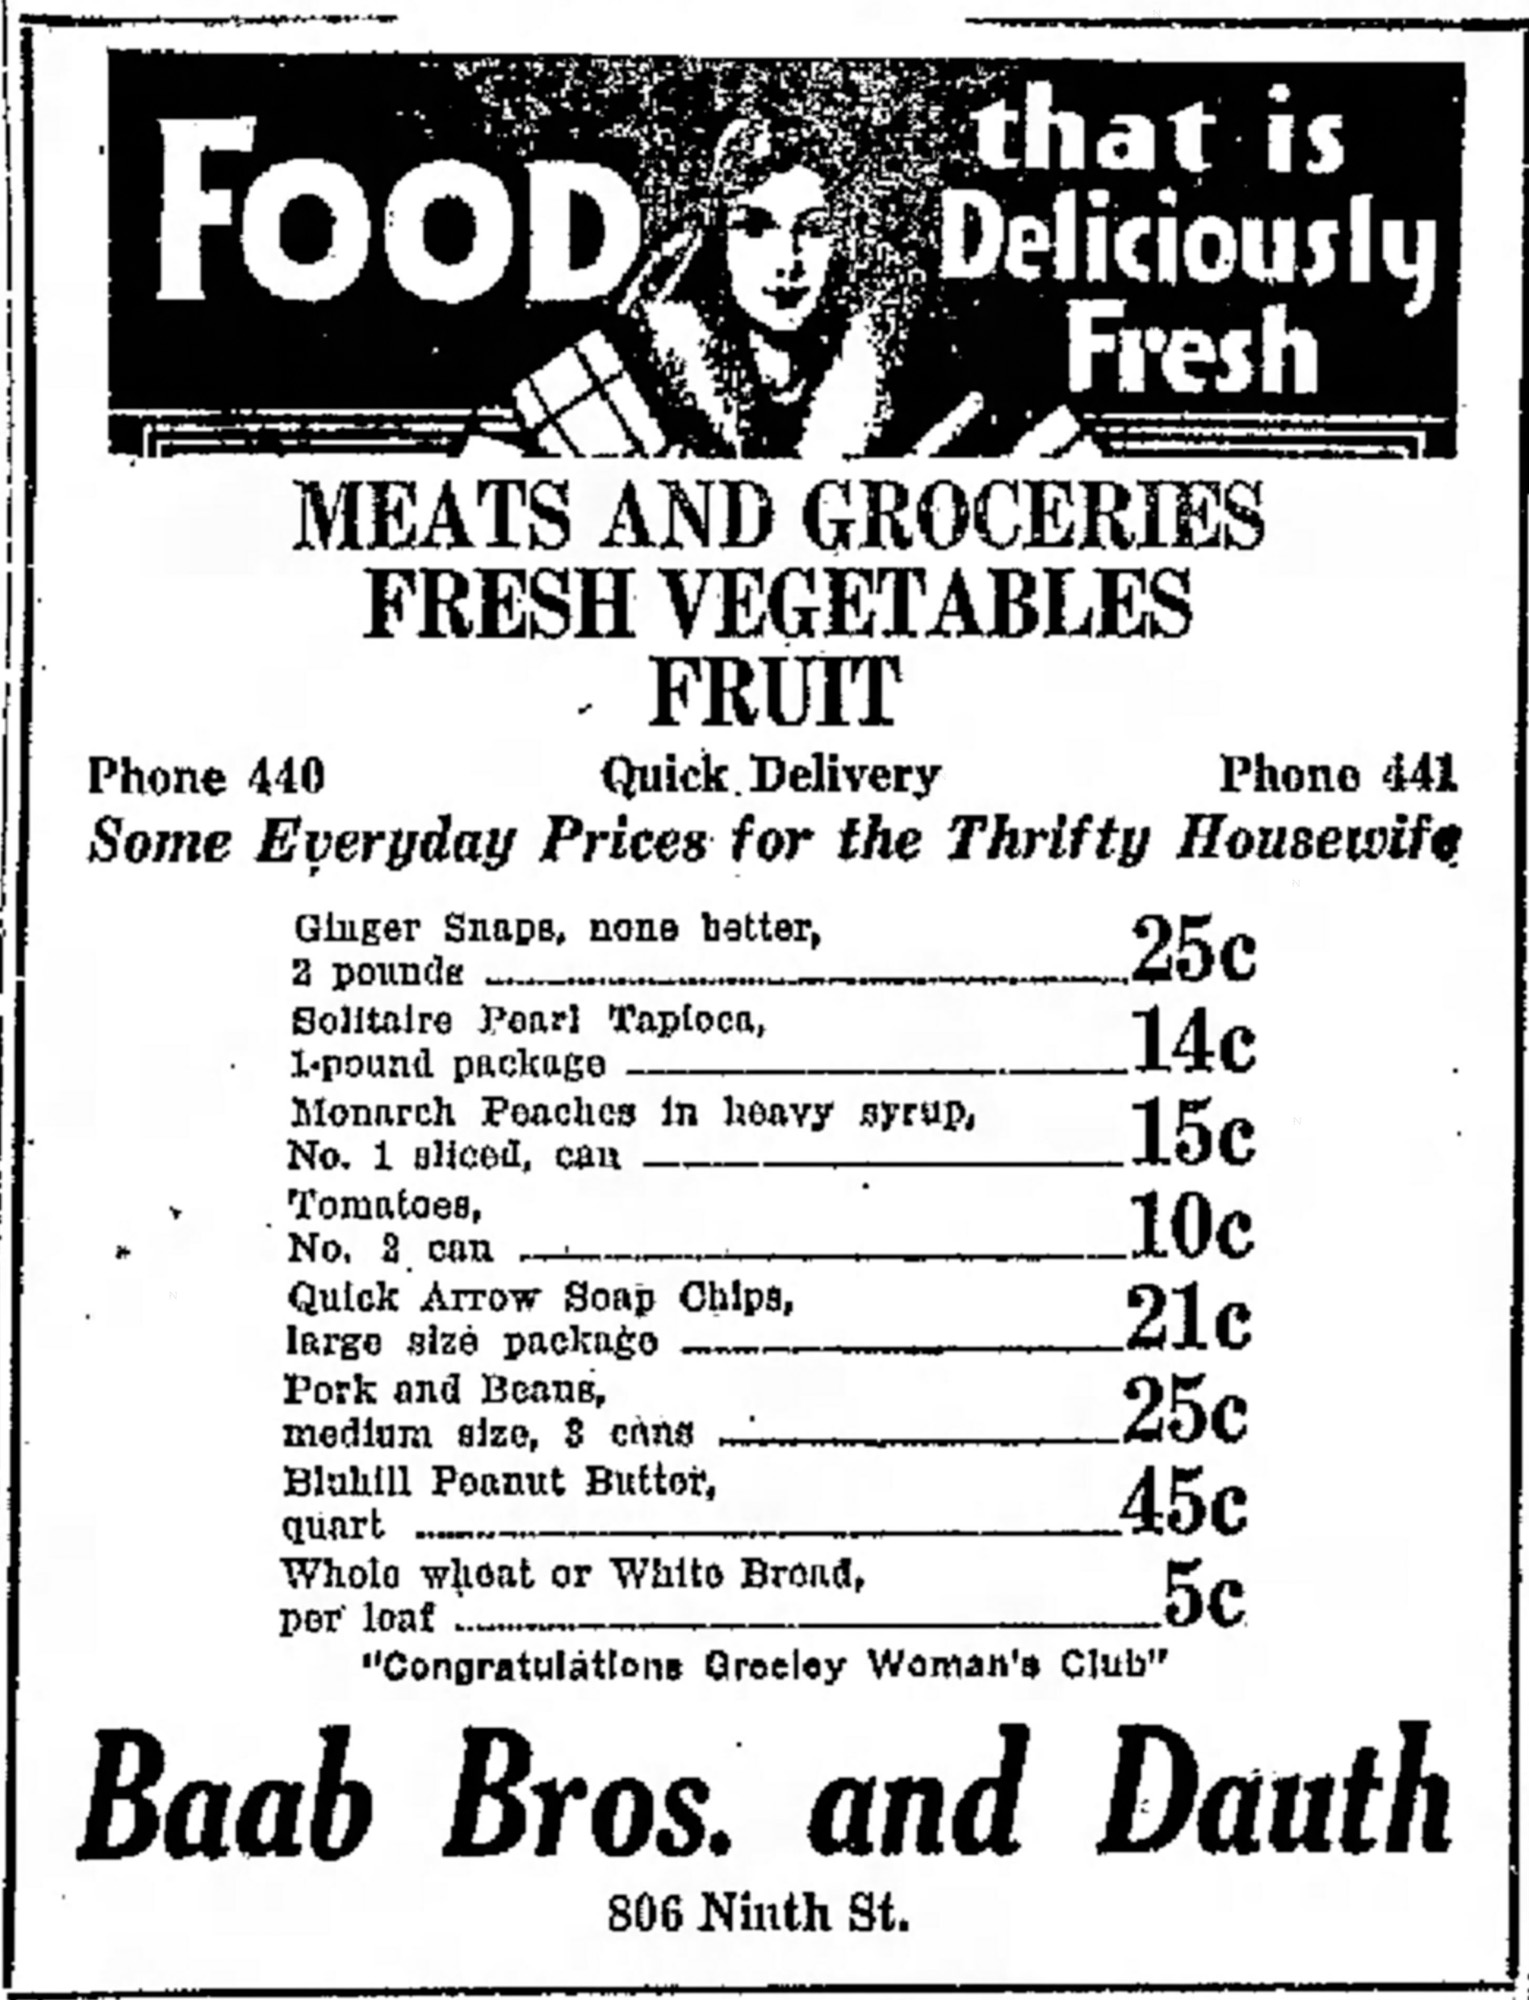 Dauth Family Archive - 1931-02-17 - Greeley Daily Tribune - Baab Bros and Dauth Advertisement